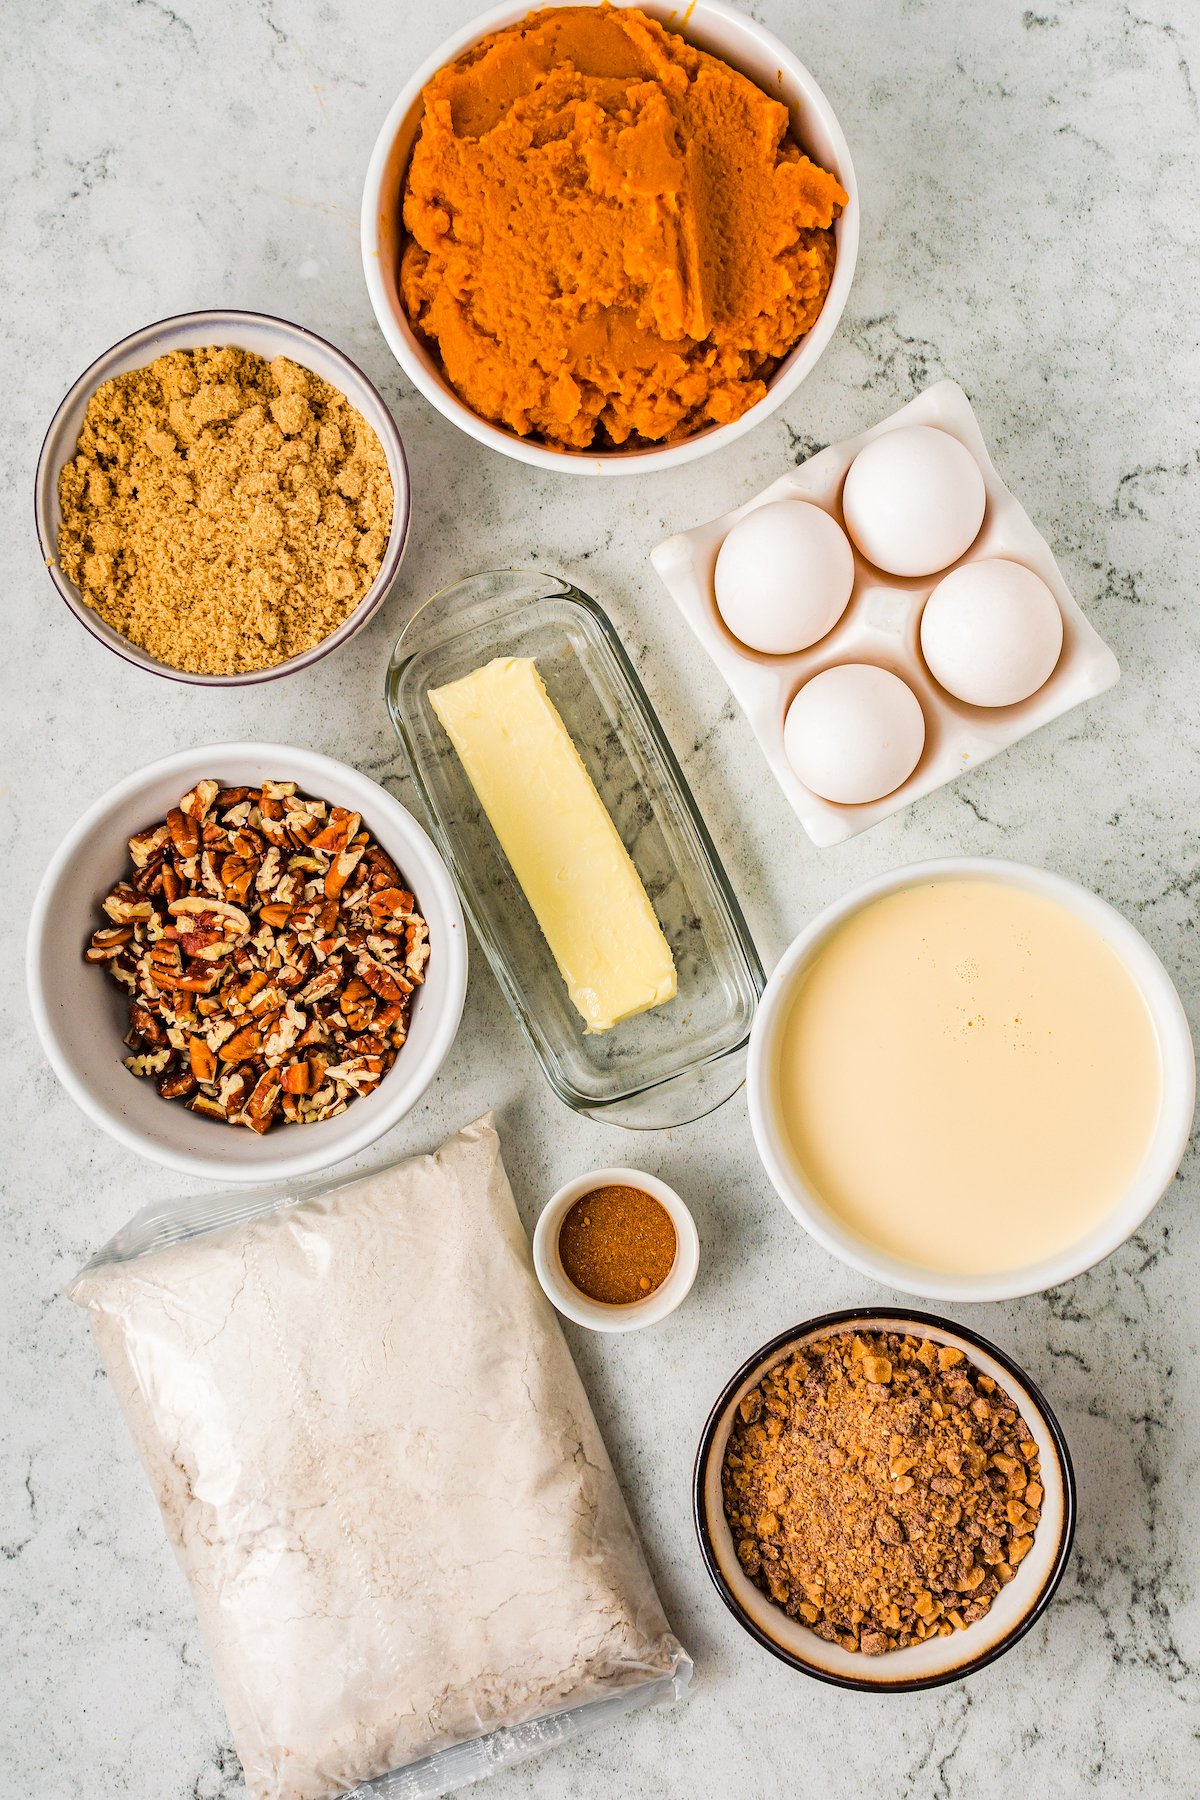 From top: Pumpkin puree, toffee pieces, butter, eggs, chopped pecans, evaporated milk, spices, cake mix, brown sugar.